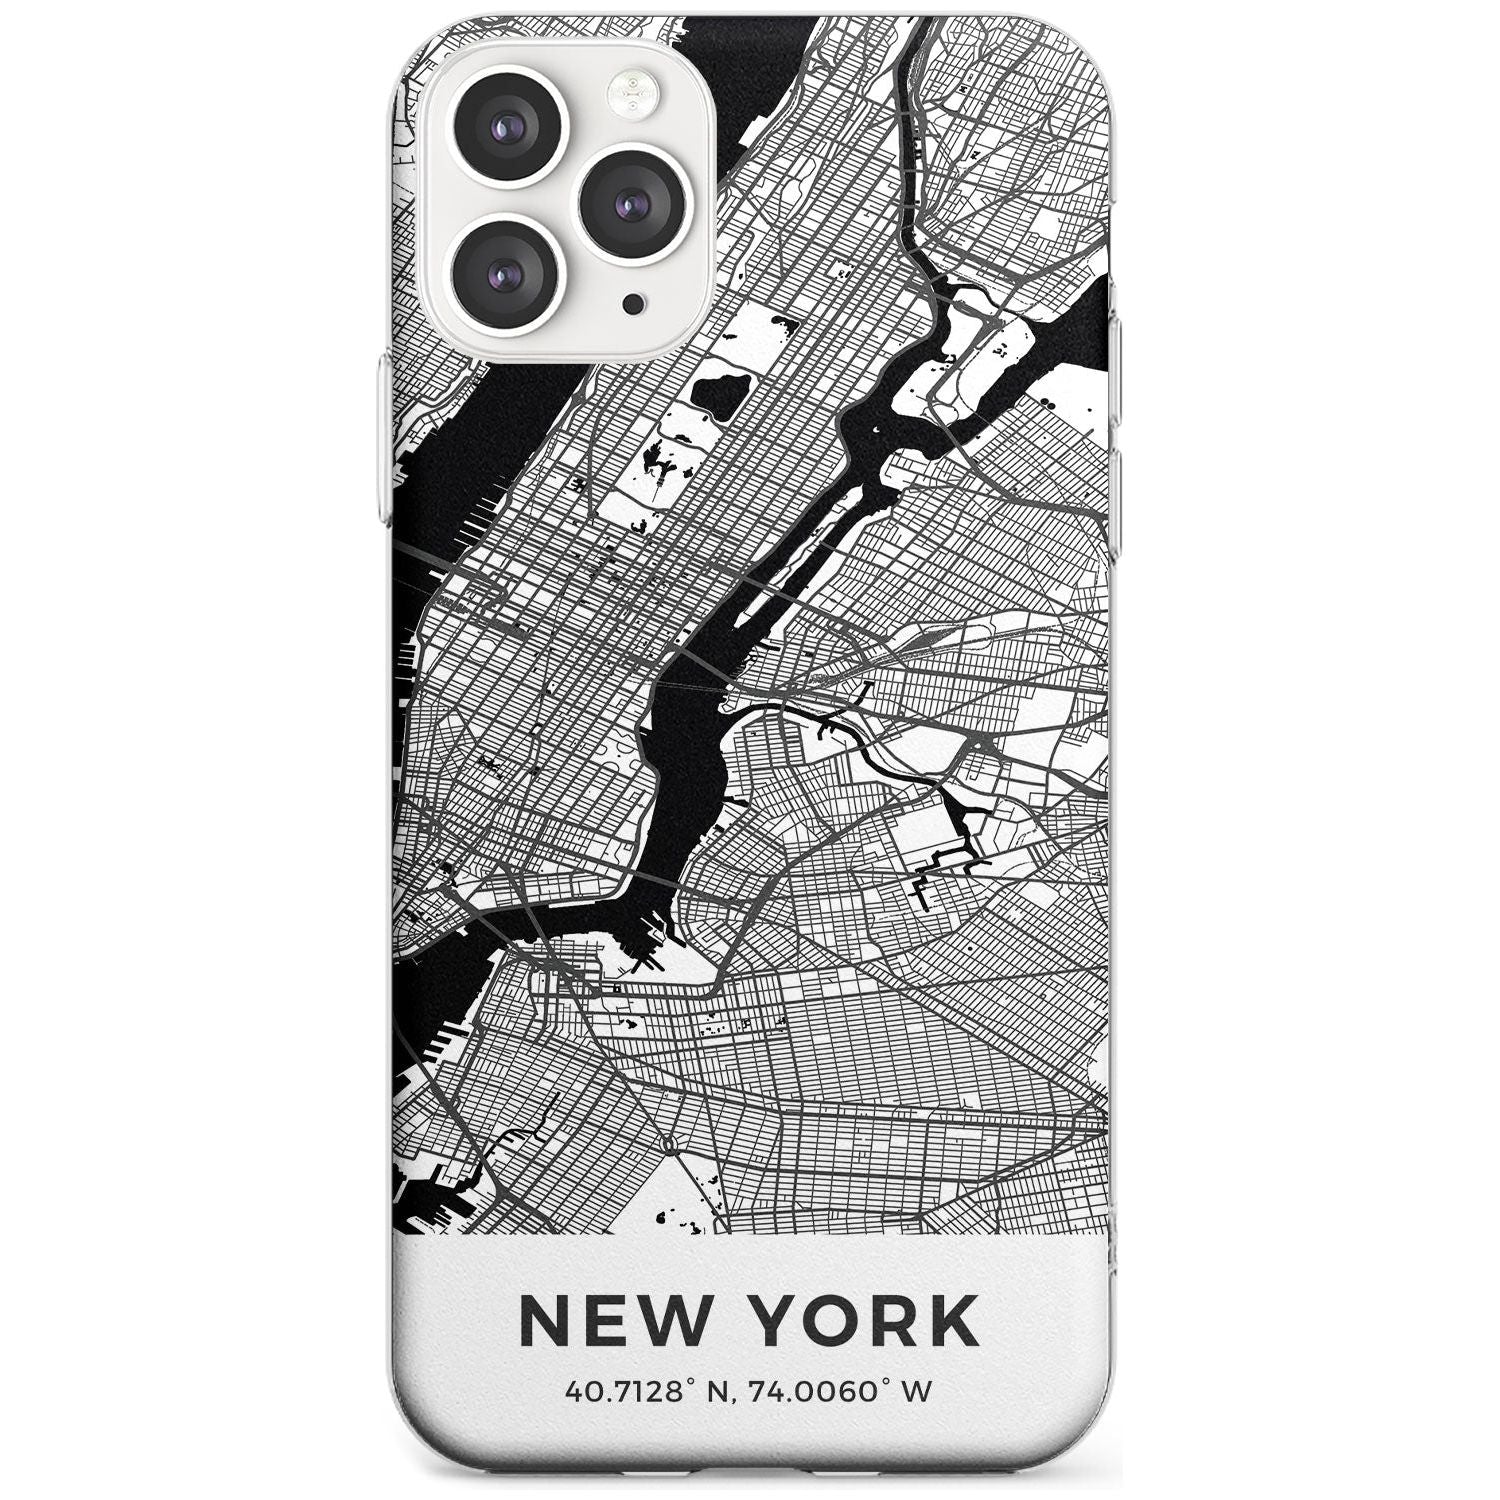 Map of New York, New York Slim TPU Phone Case for iPhone 11 Pro Max